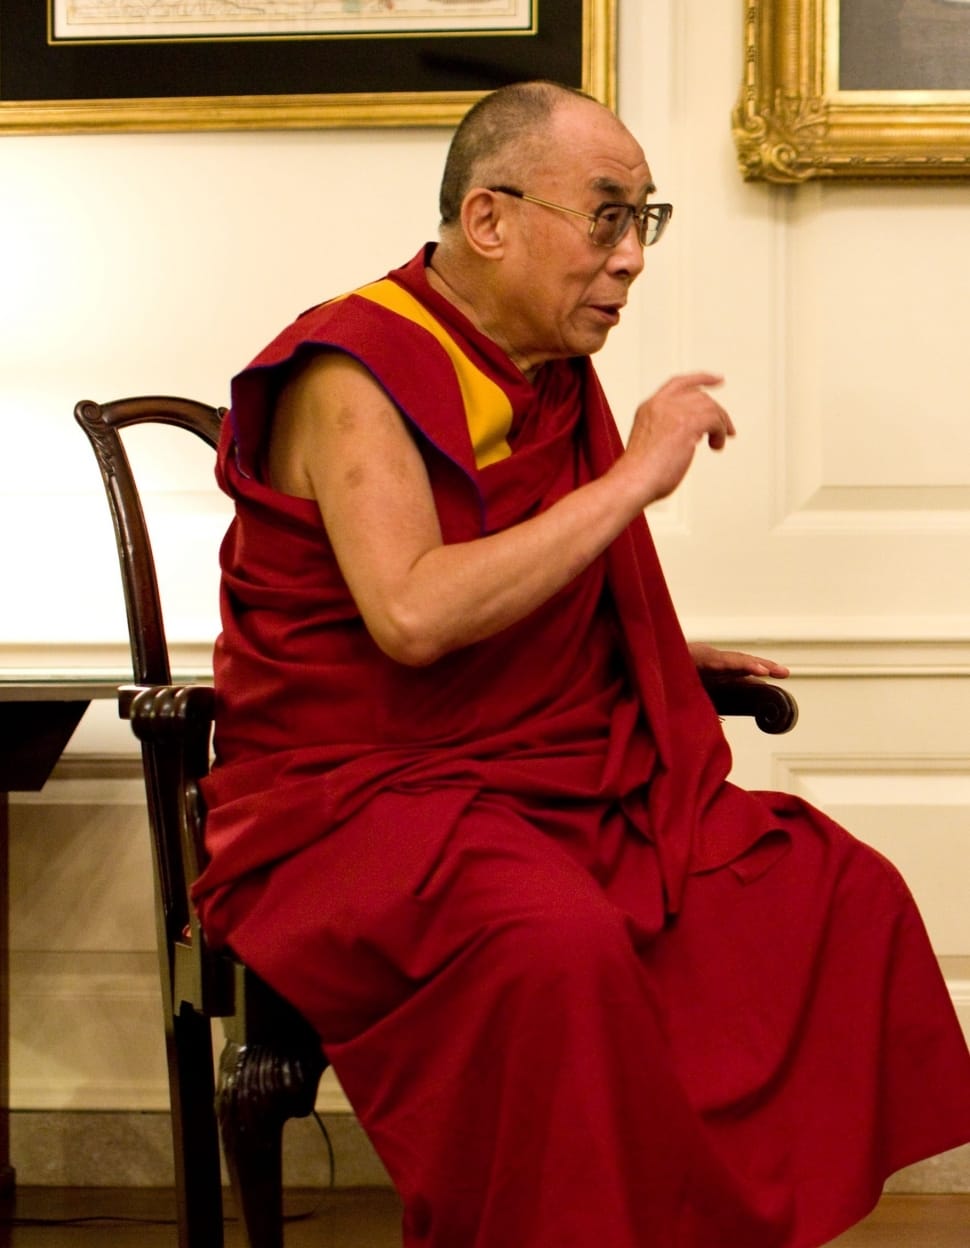 Dalai Lama, Portrait, Discussion, Smile, one man only, mature adult preview